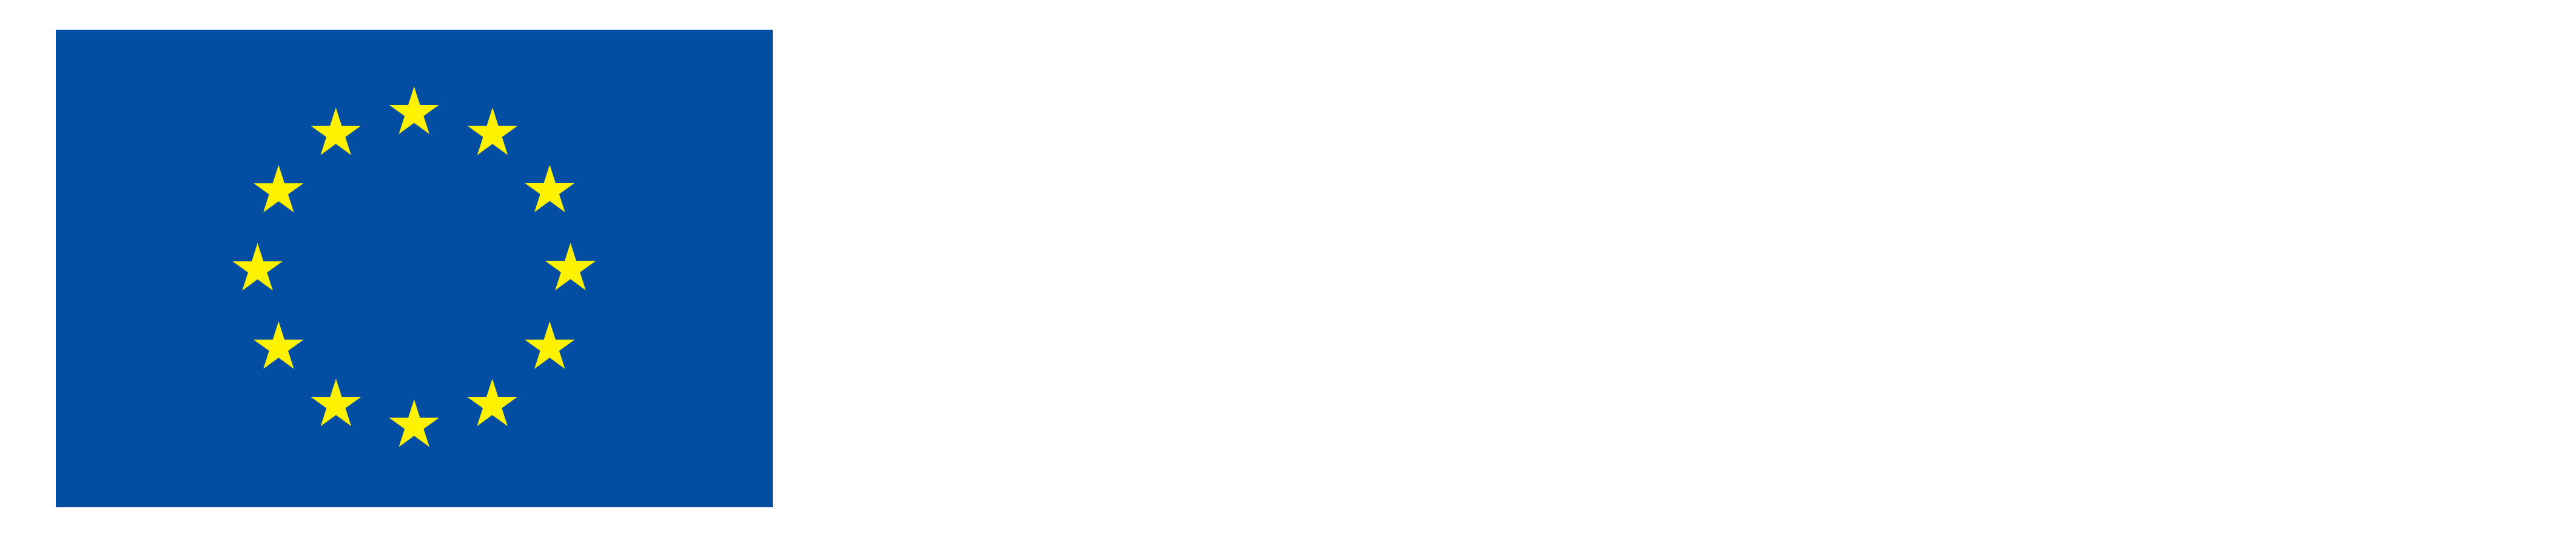 EN Co-Funded by the EU_NEG.png (1)